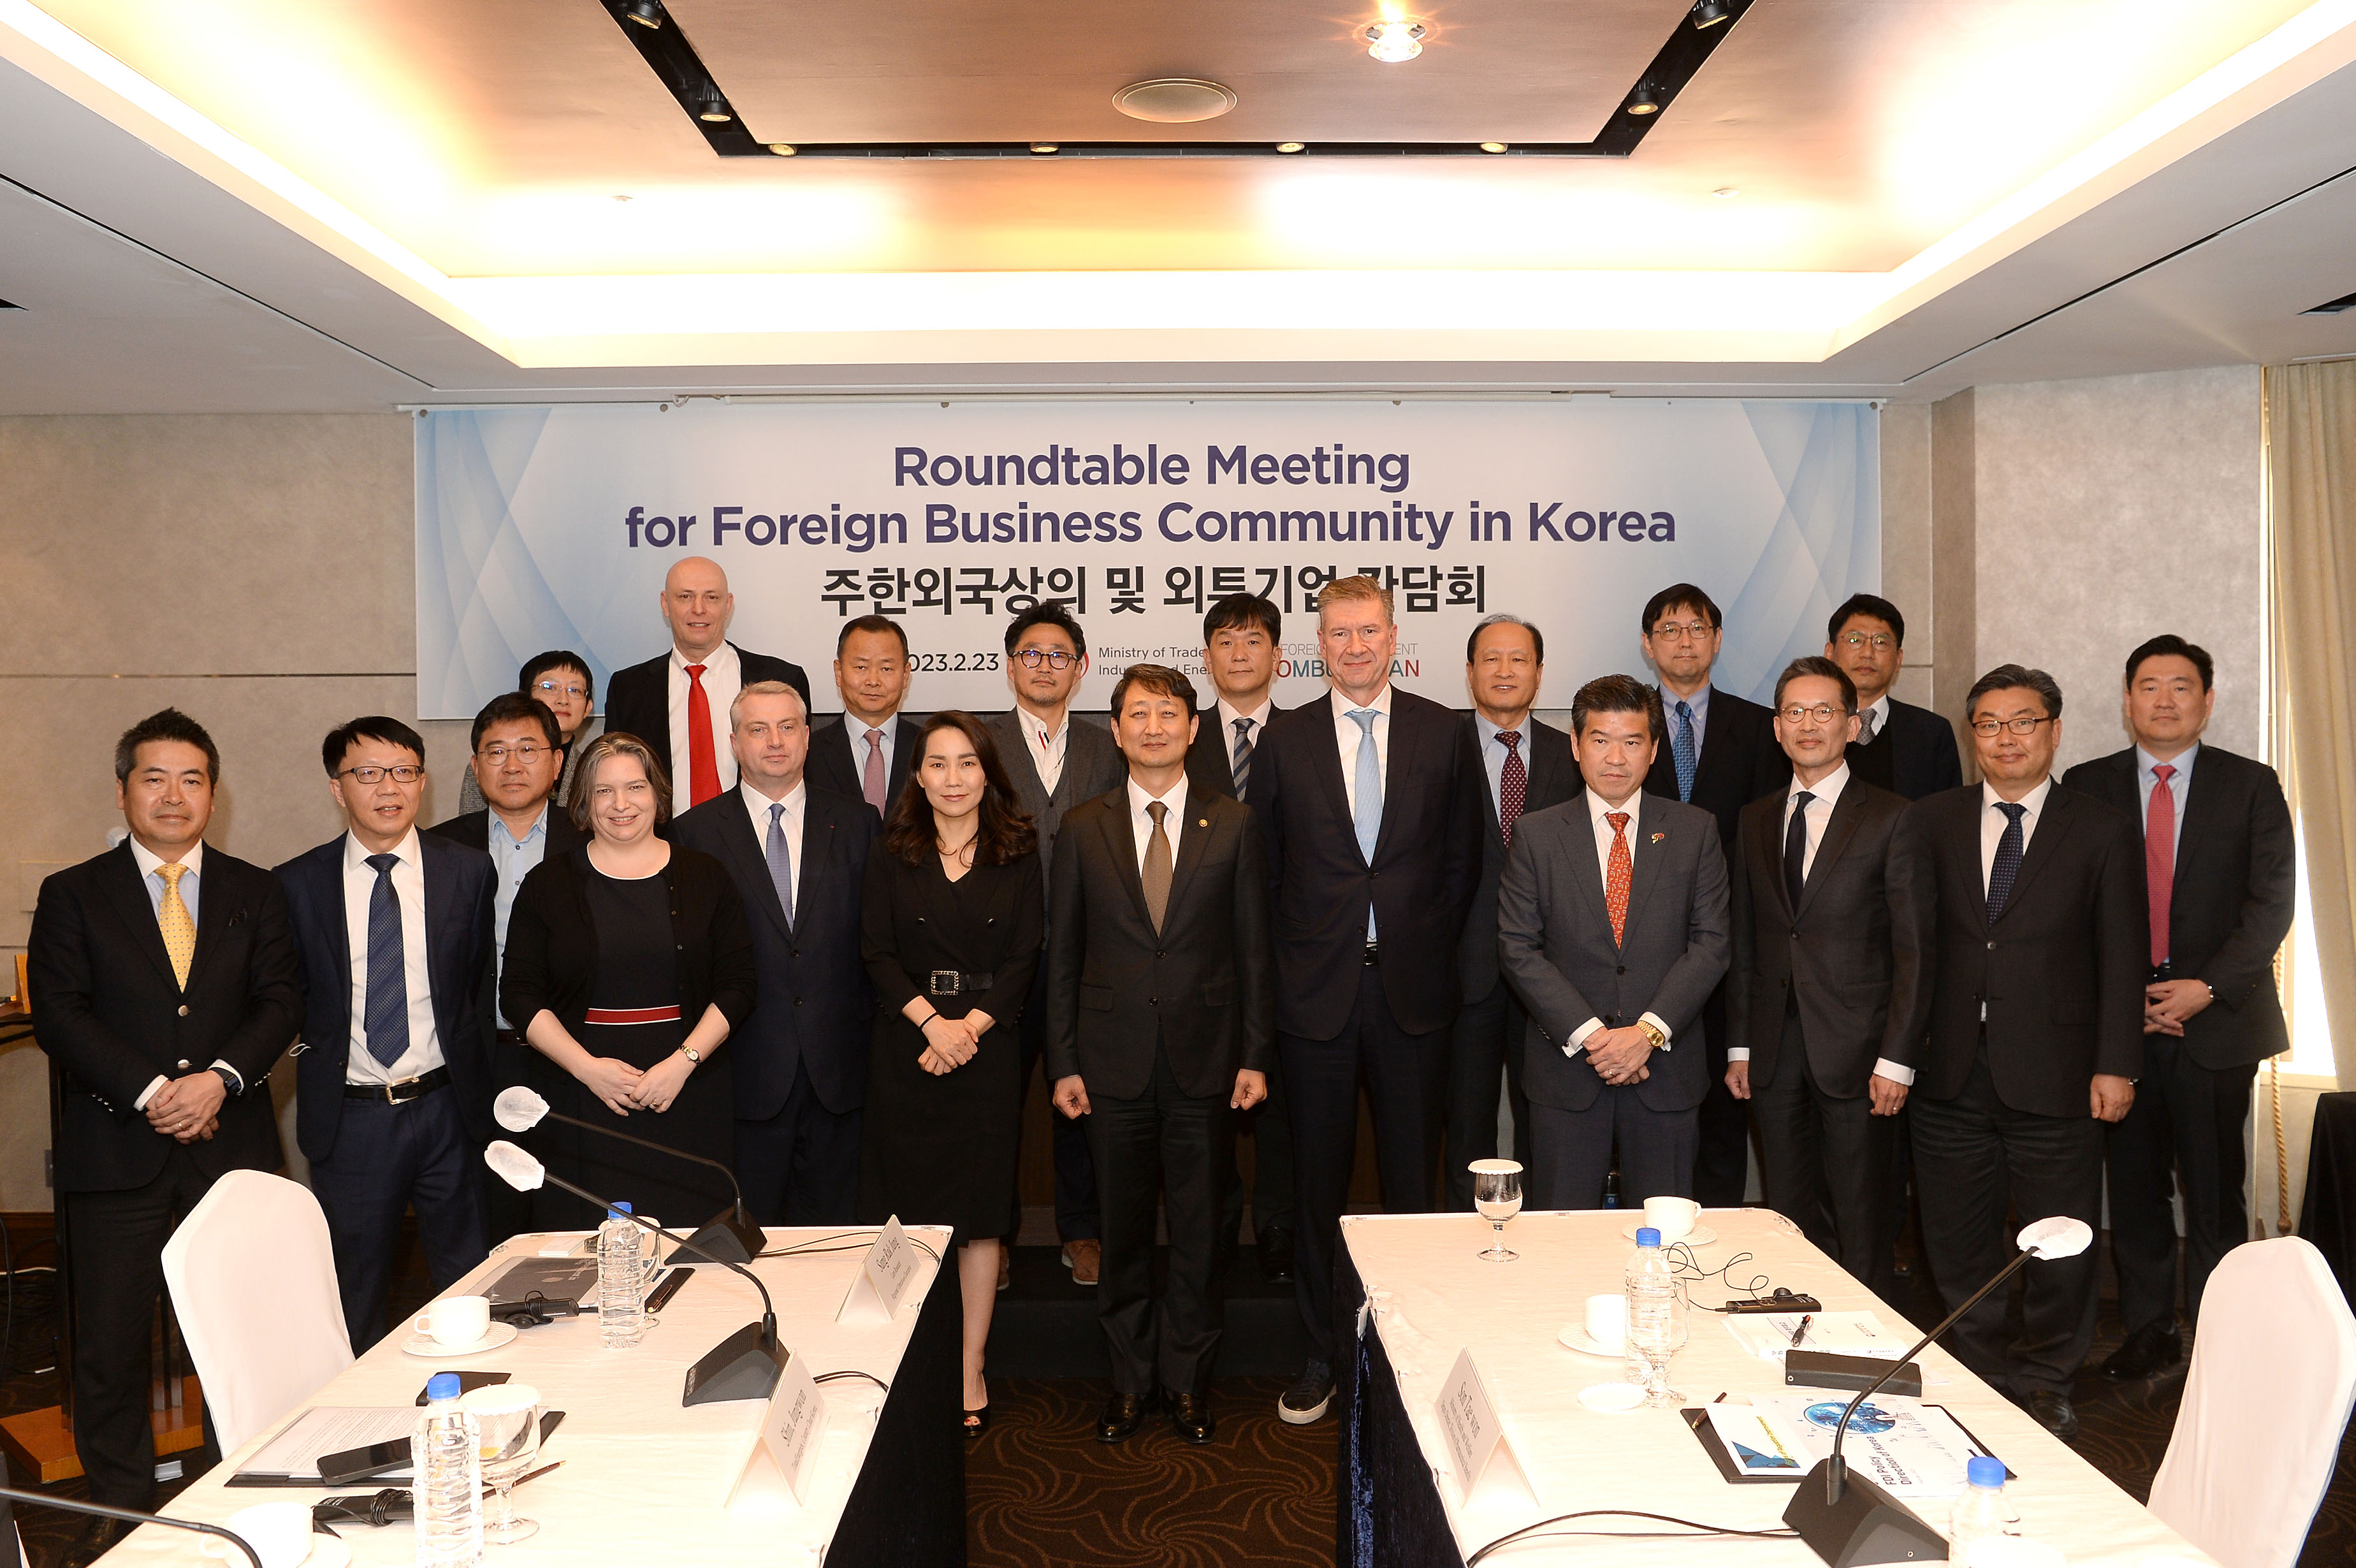 Roundtable Meeting for Foreign Business Community in Korea